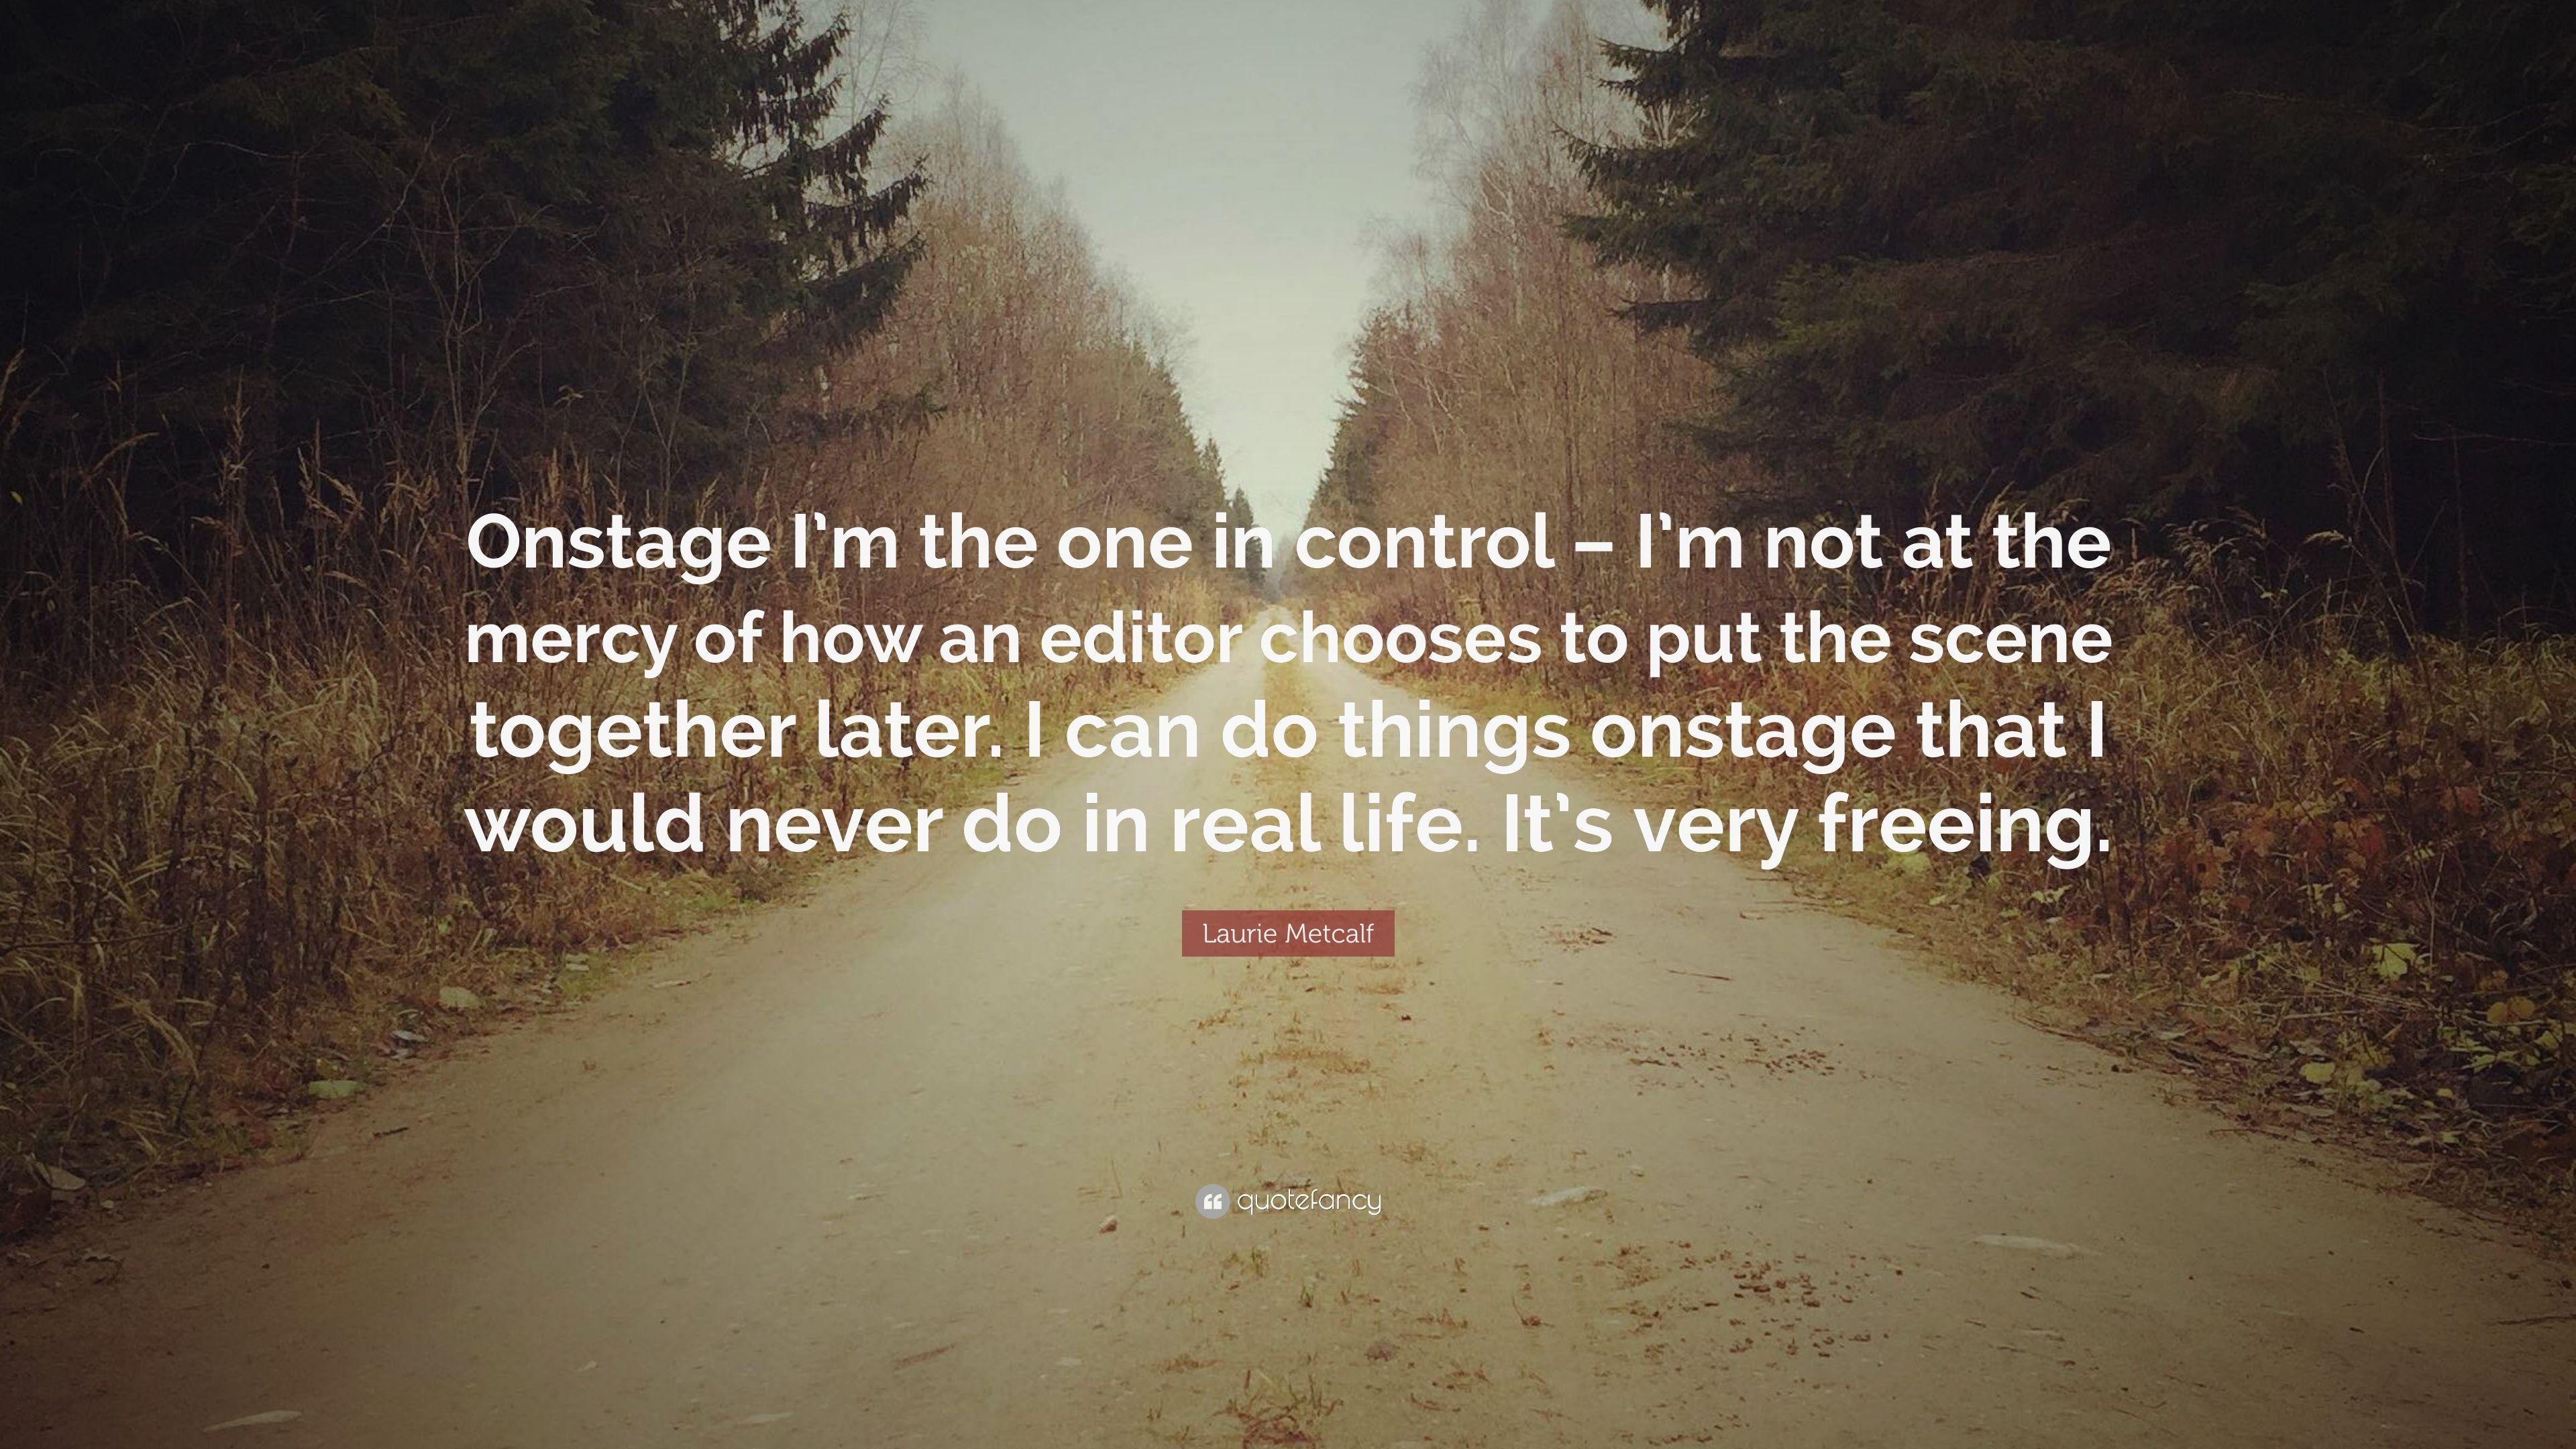 Laurie Metcalf Quote: “Onstage I'm the one in control